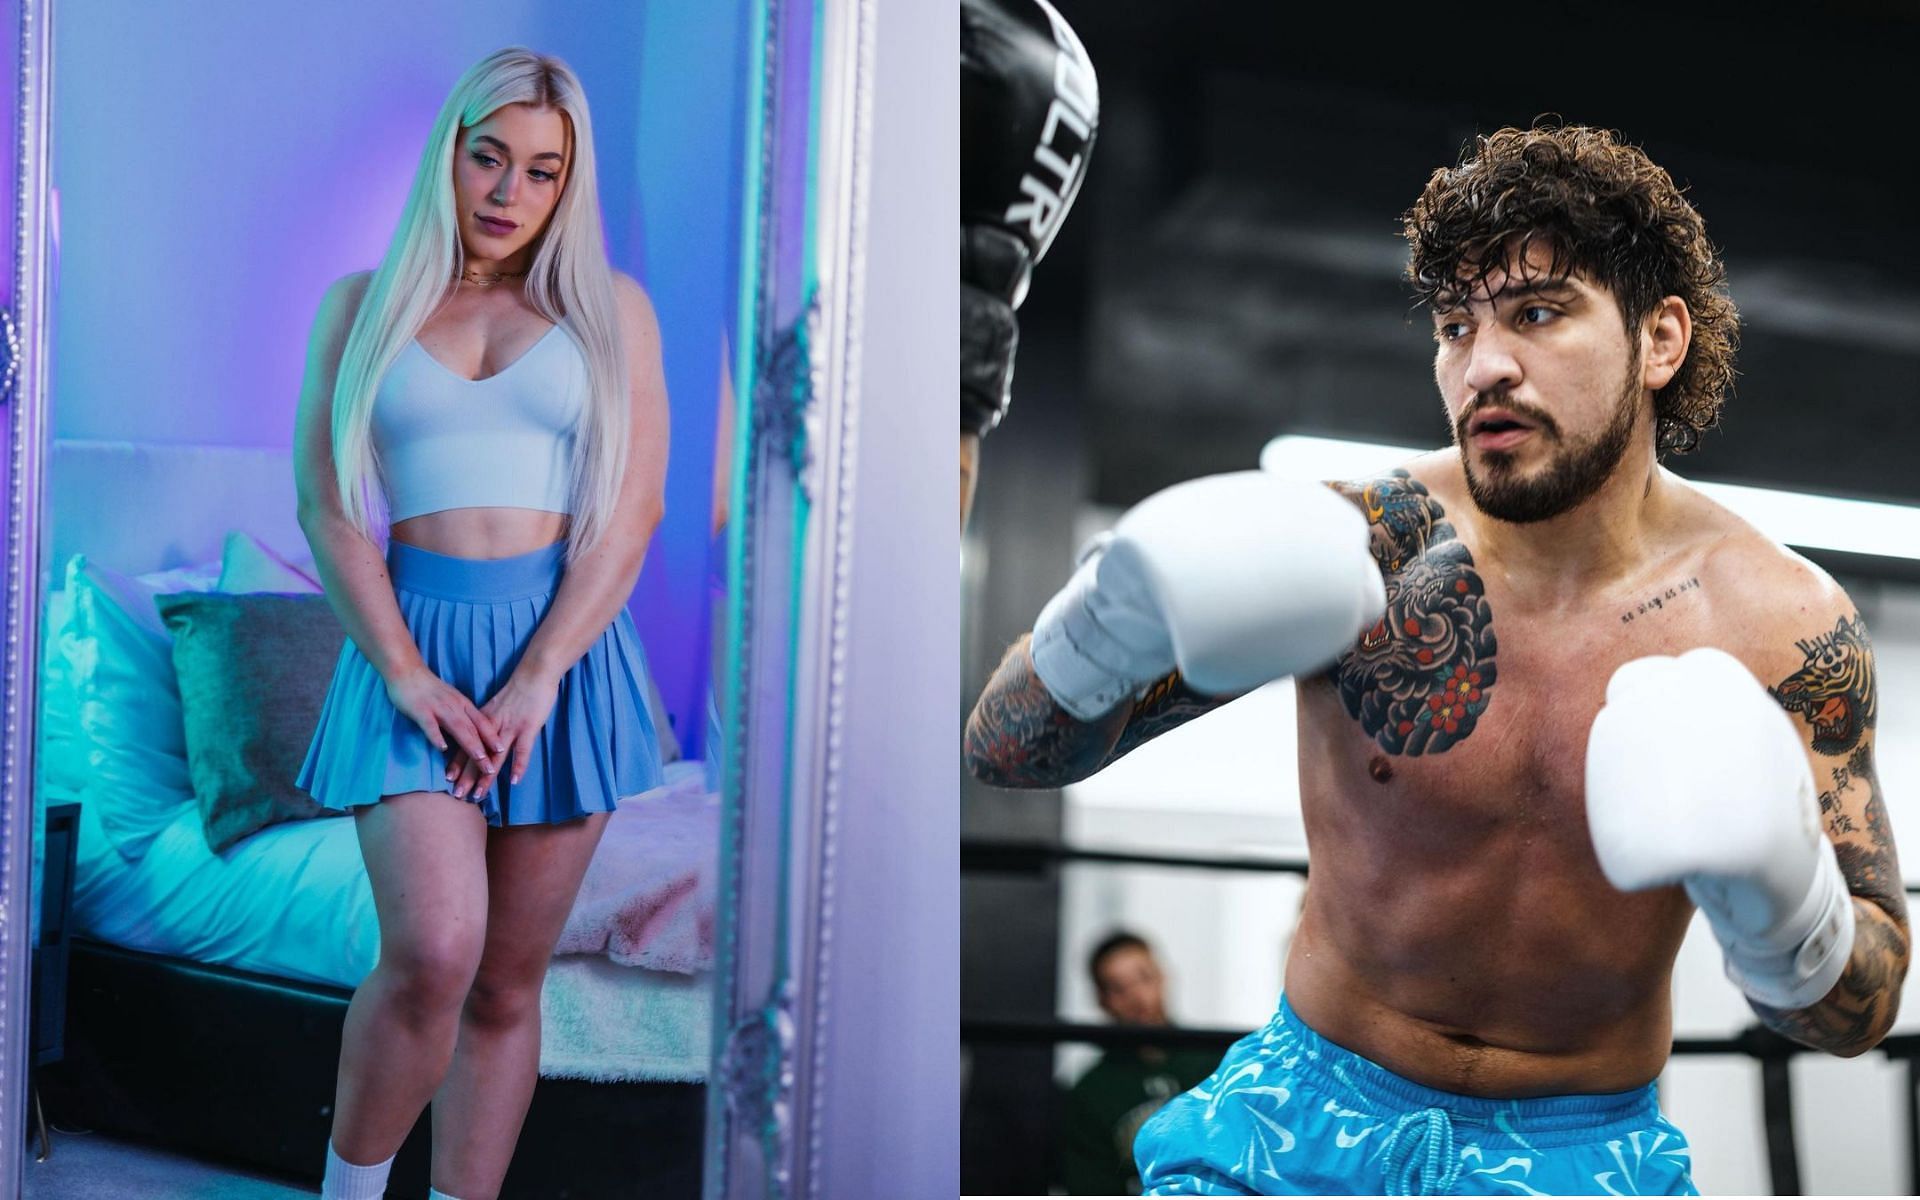 Elle Brooke (left) and Dillon Danis (right) (Images courtesy @thedumblesong and @dillondanis on Instagram)